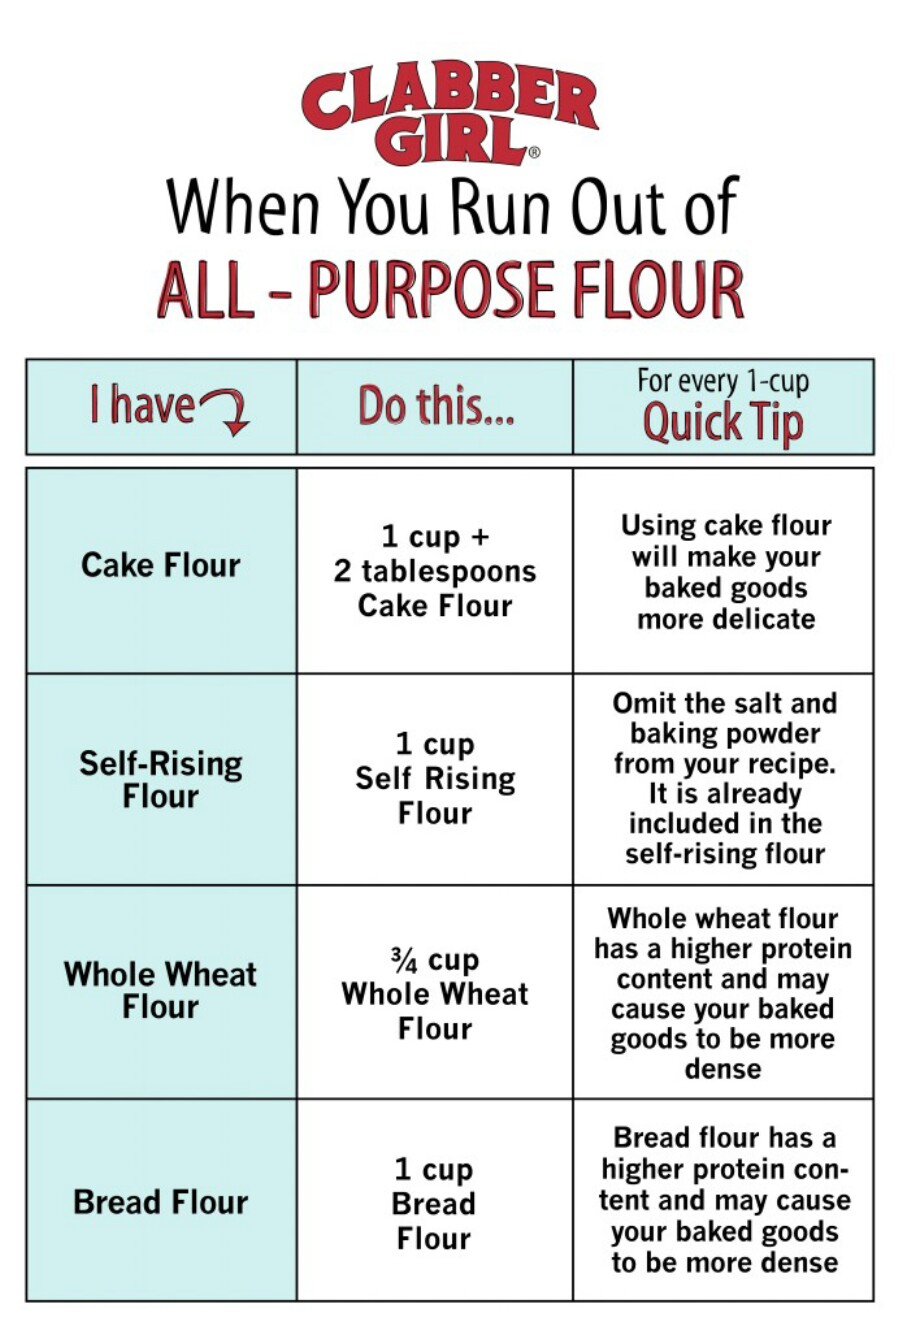 15. Learn all about the different types of flour.